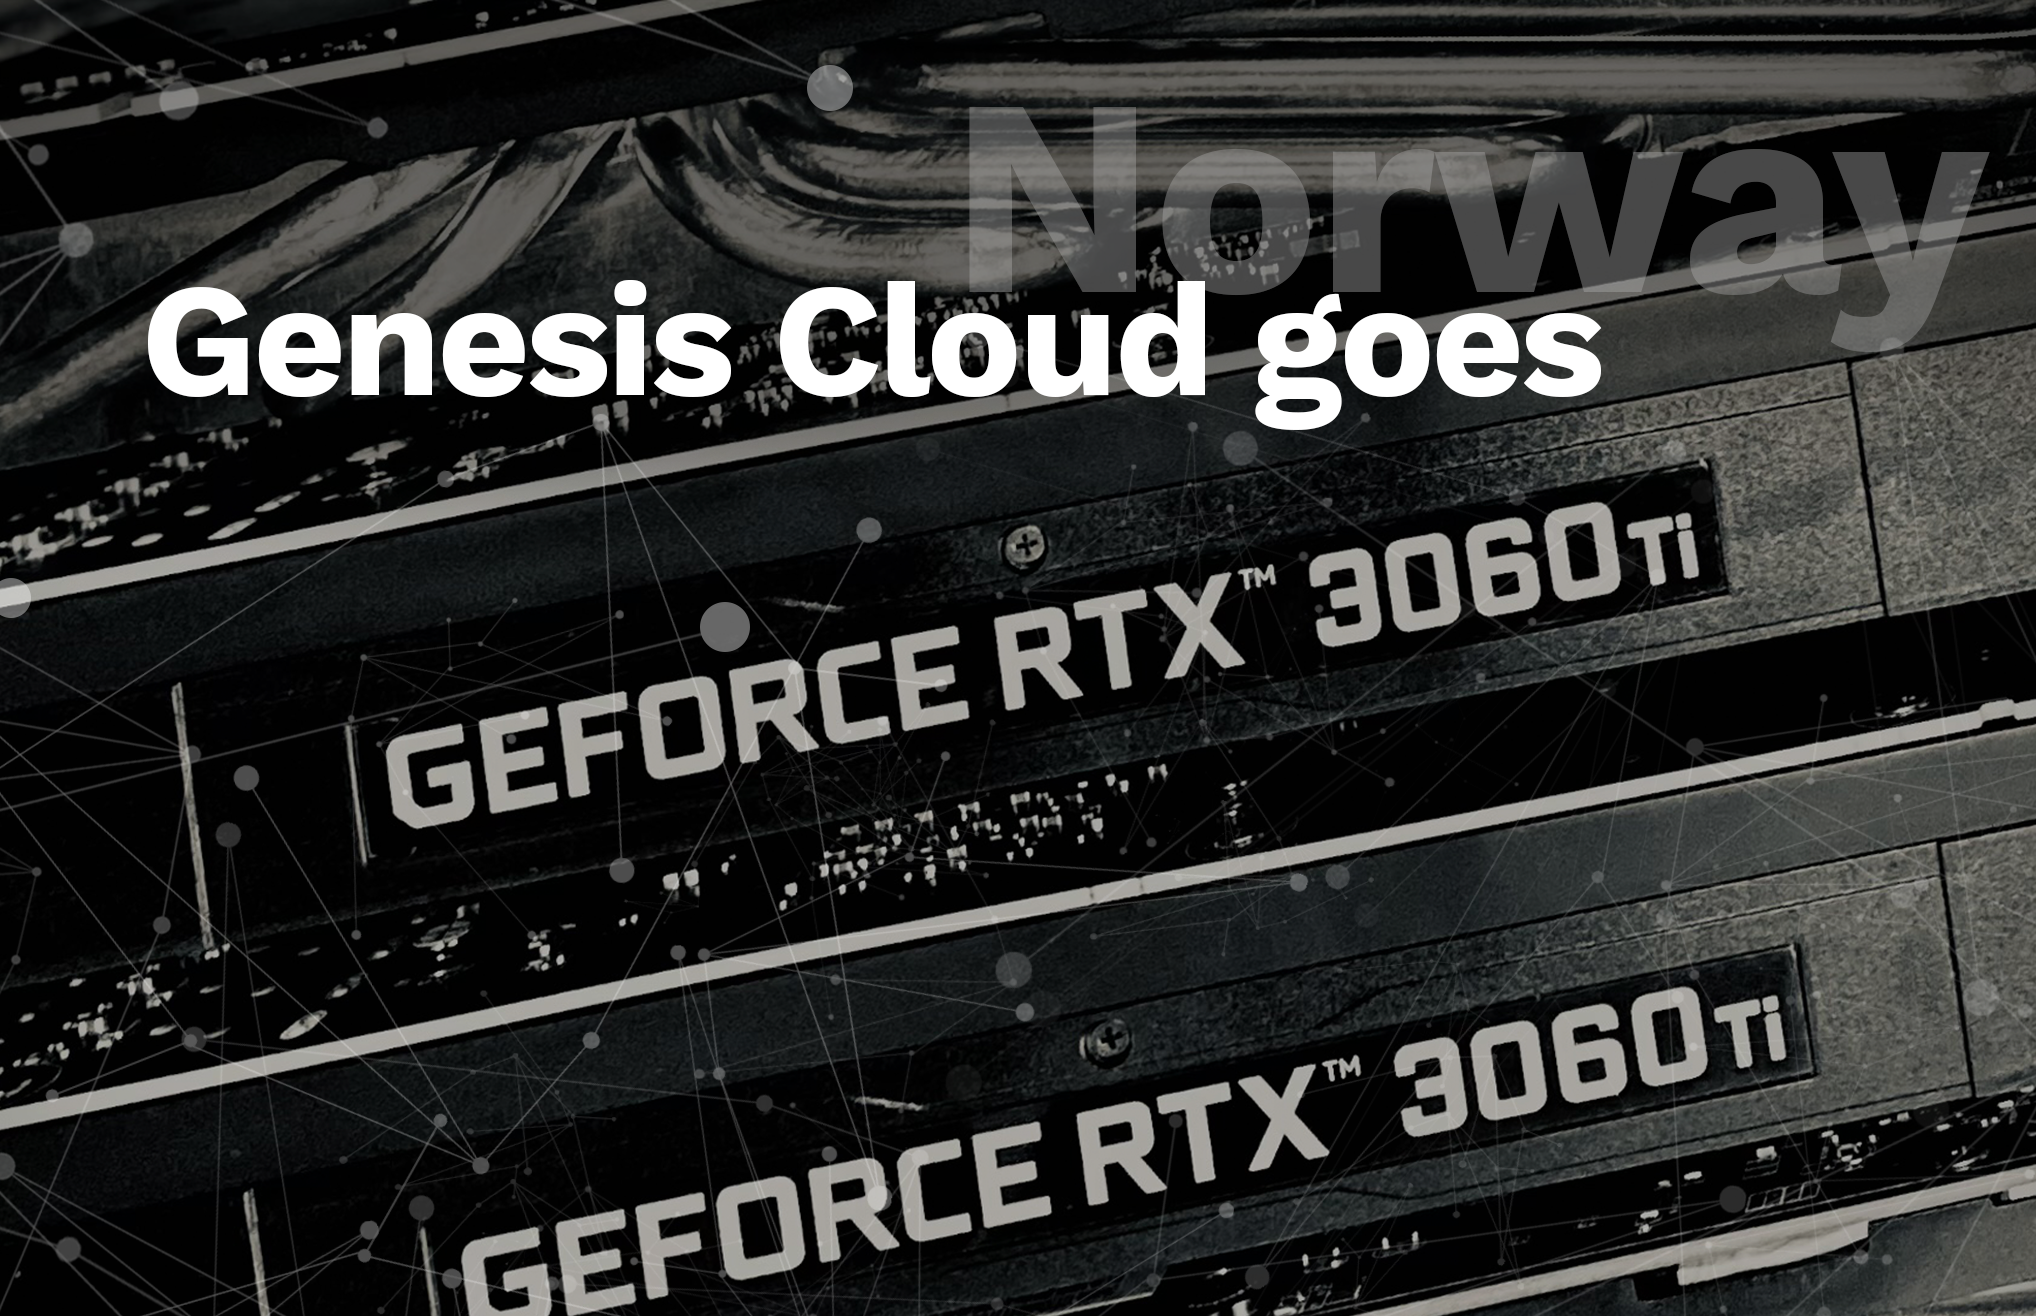 Genesis Cloud goes NVIDIA® GeForce® RTX 3060 Ti: “Get the most performance per dollar”